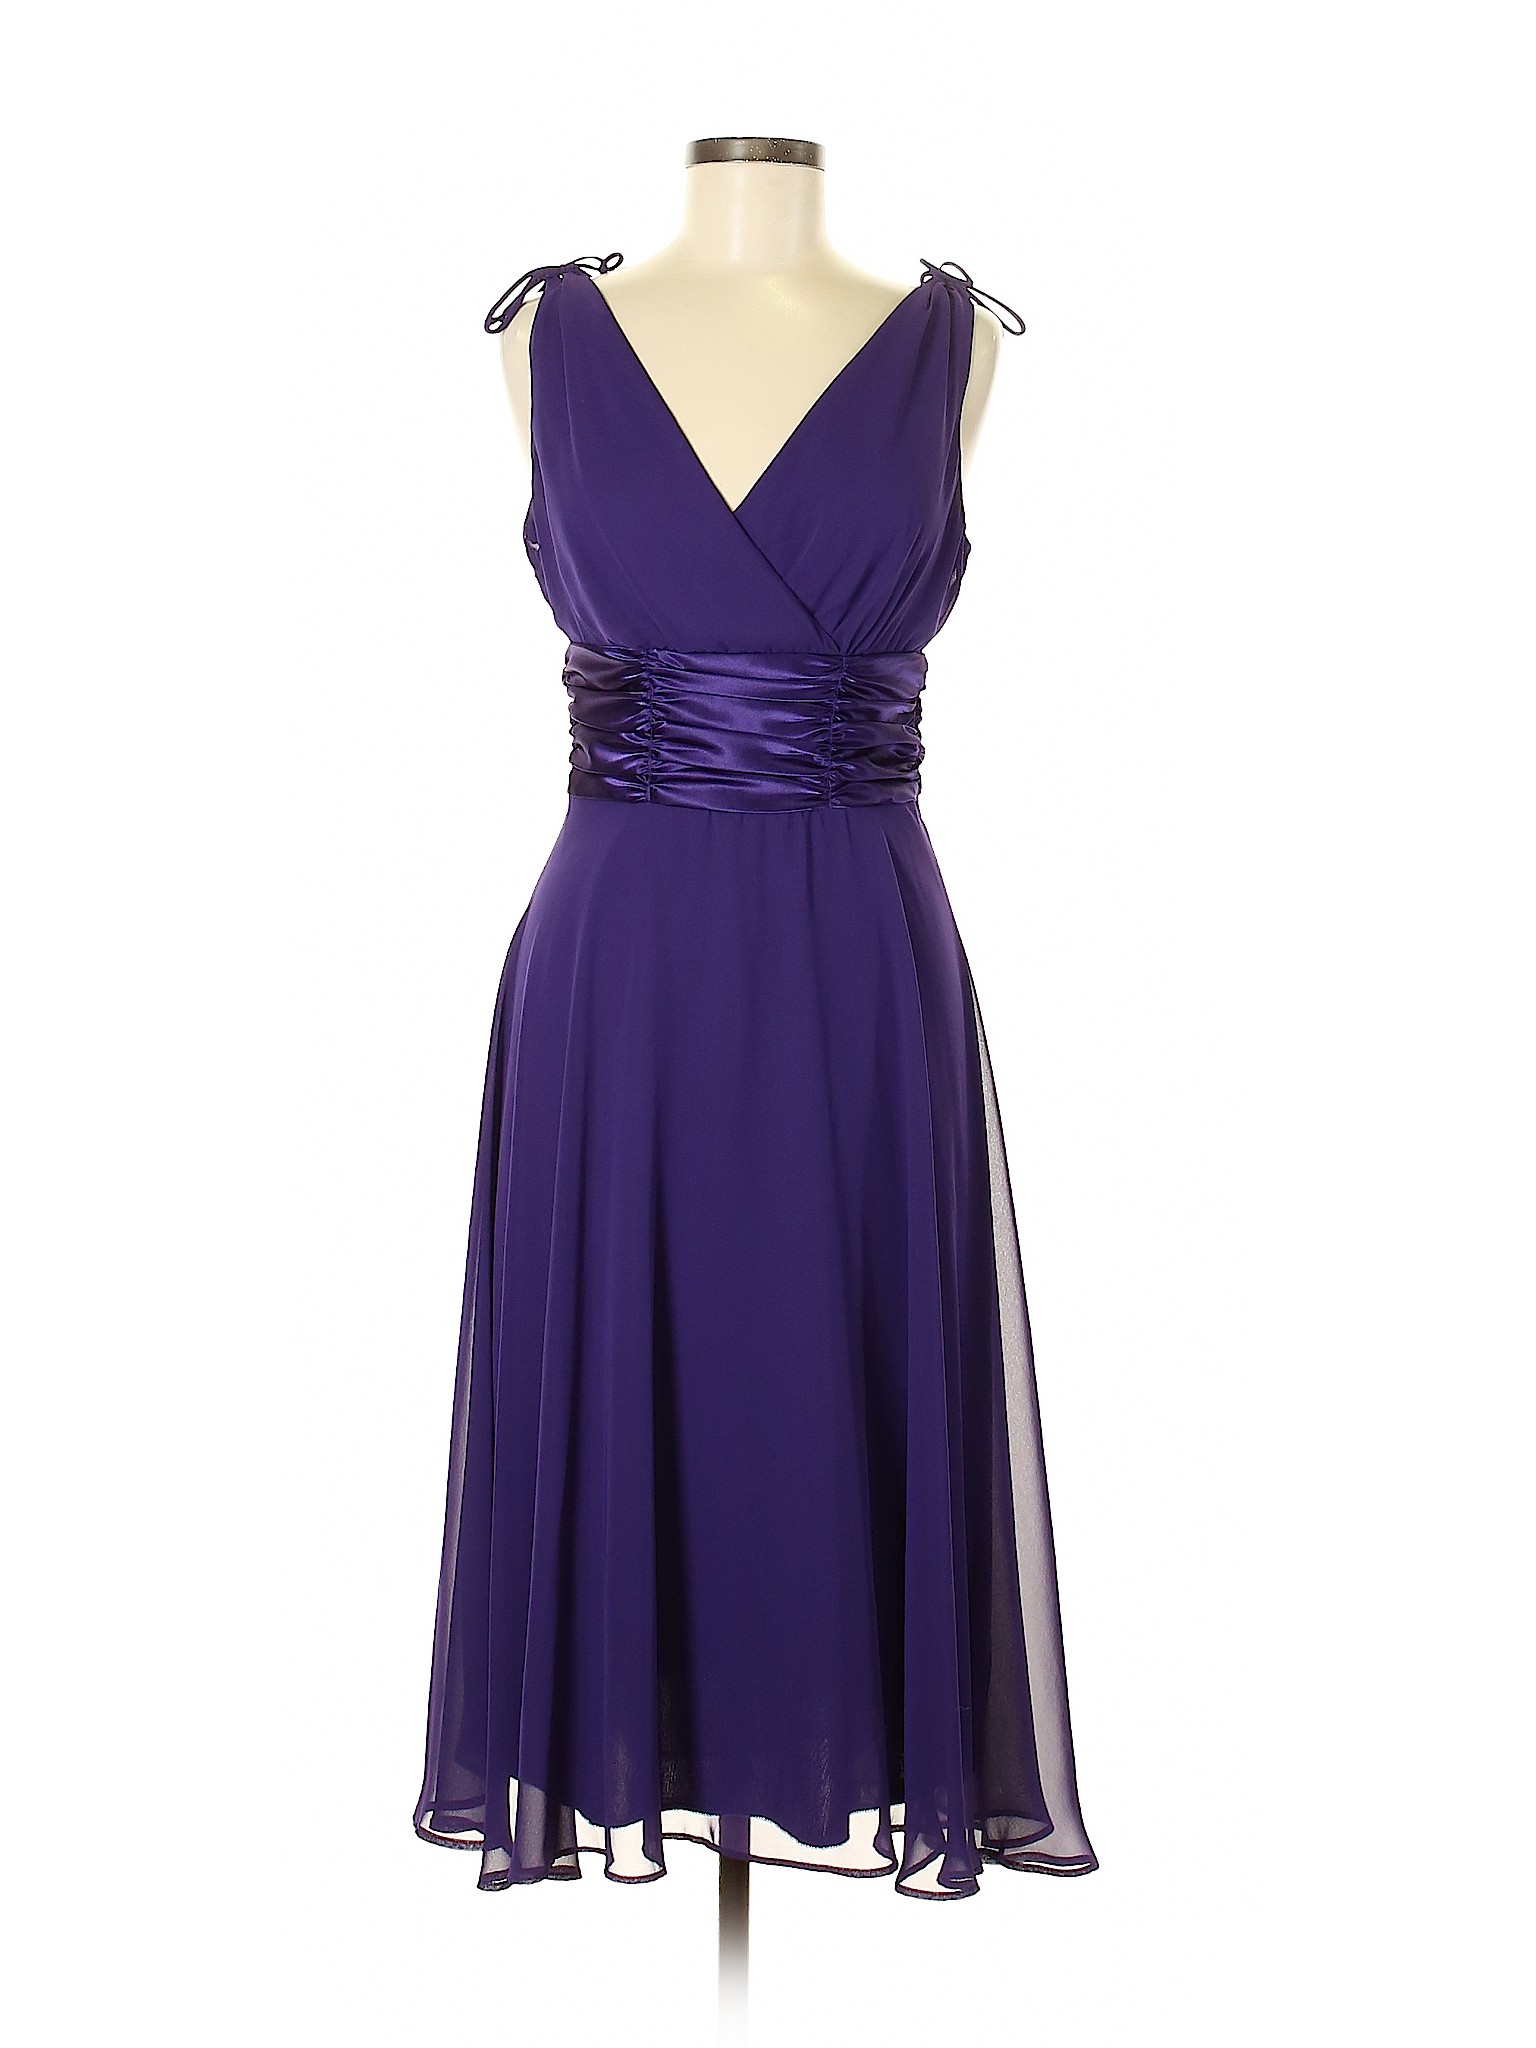 DressBarn 100% Polyester Solid Purple Cocktail Dress Size 8 - 94% off ...